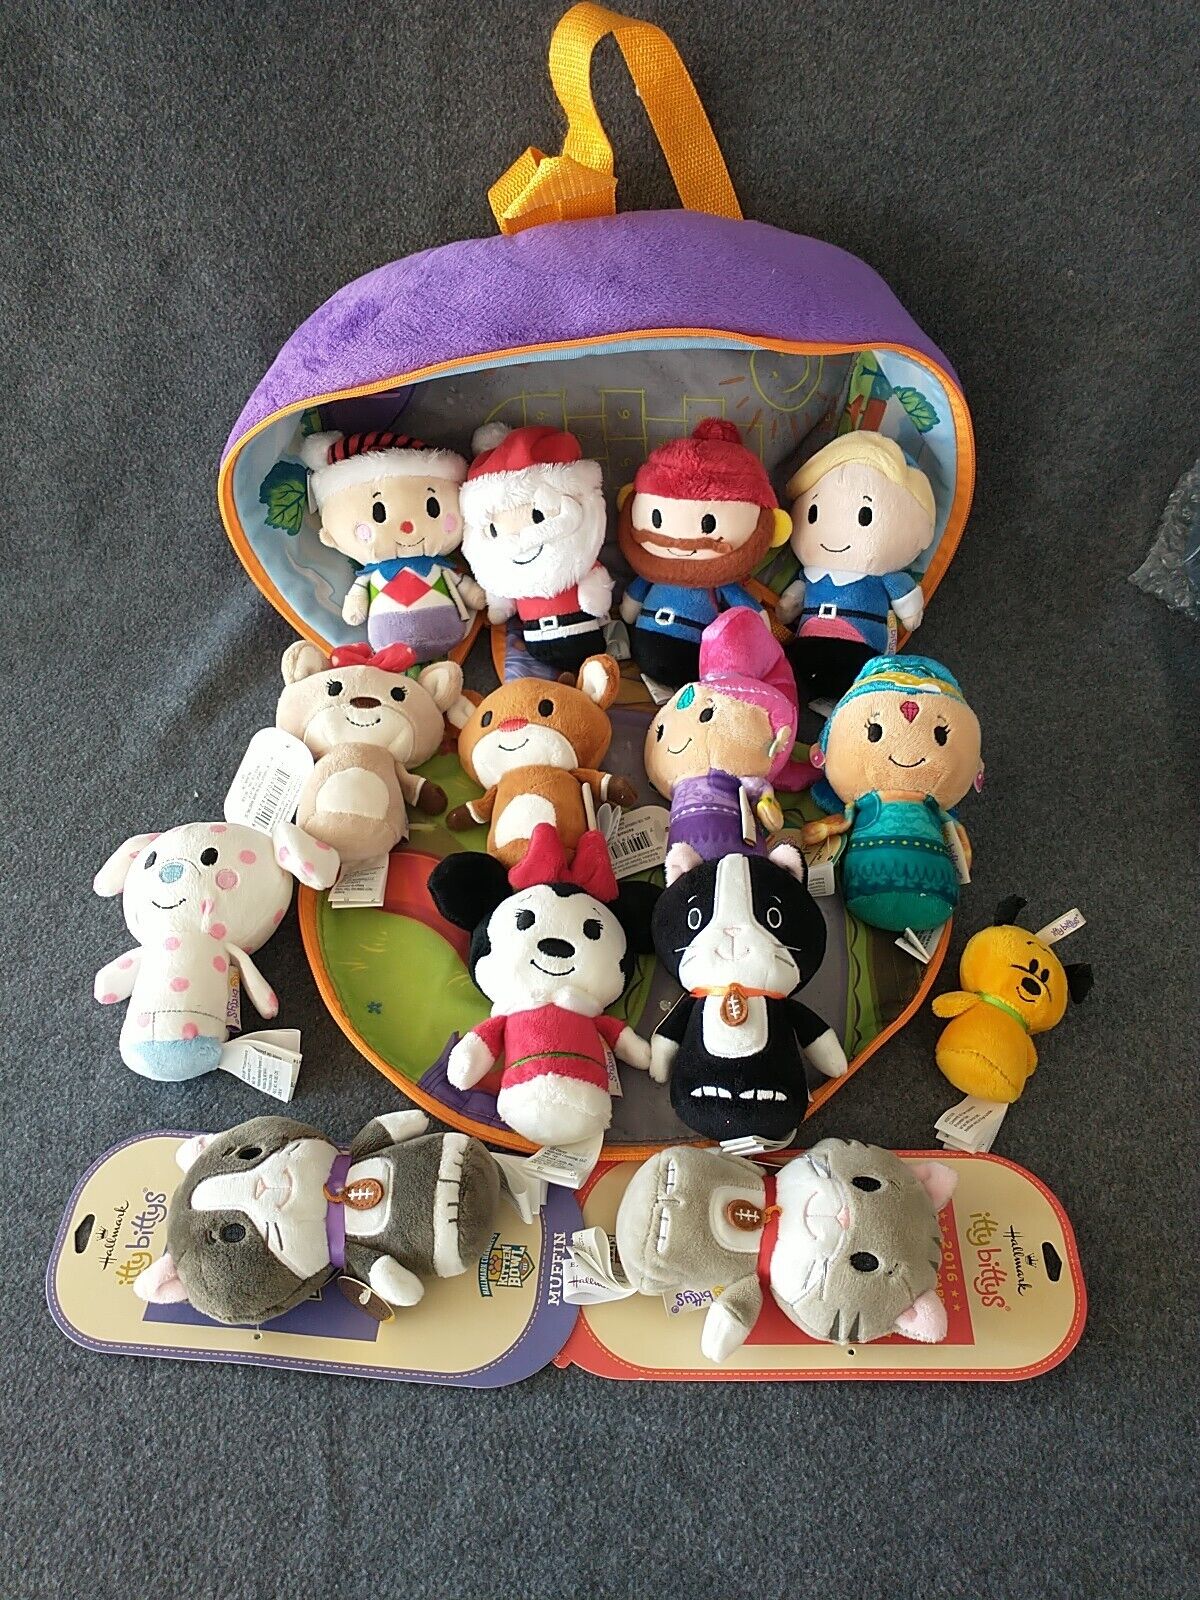 Hallmark Itty Bittys Plush Lot of 14 and Carrying Case/Backpack